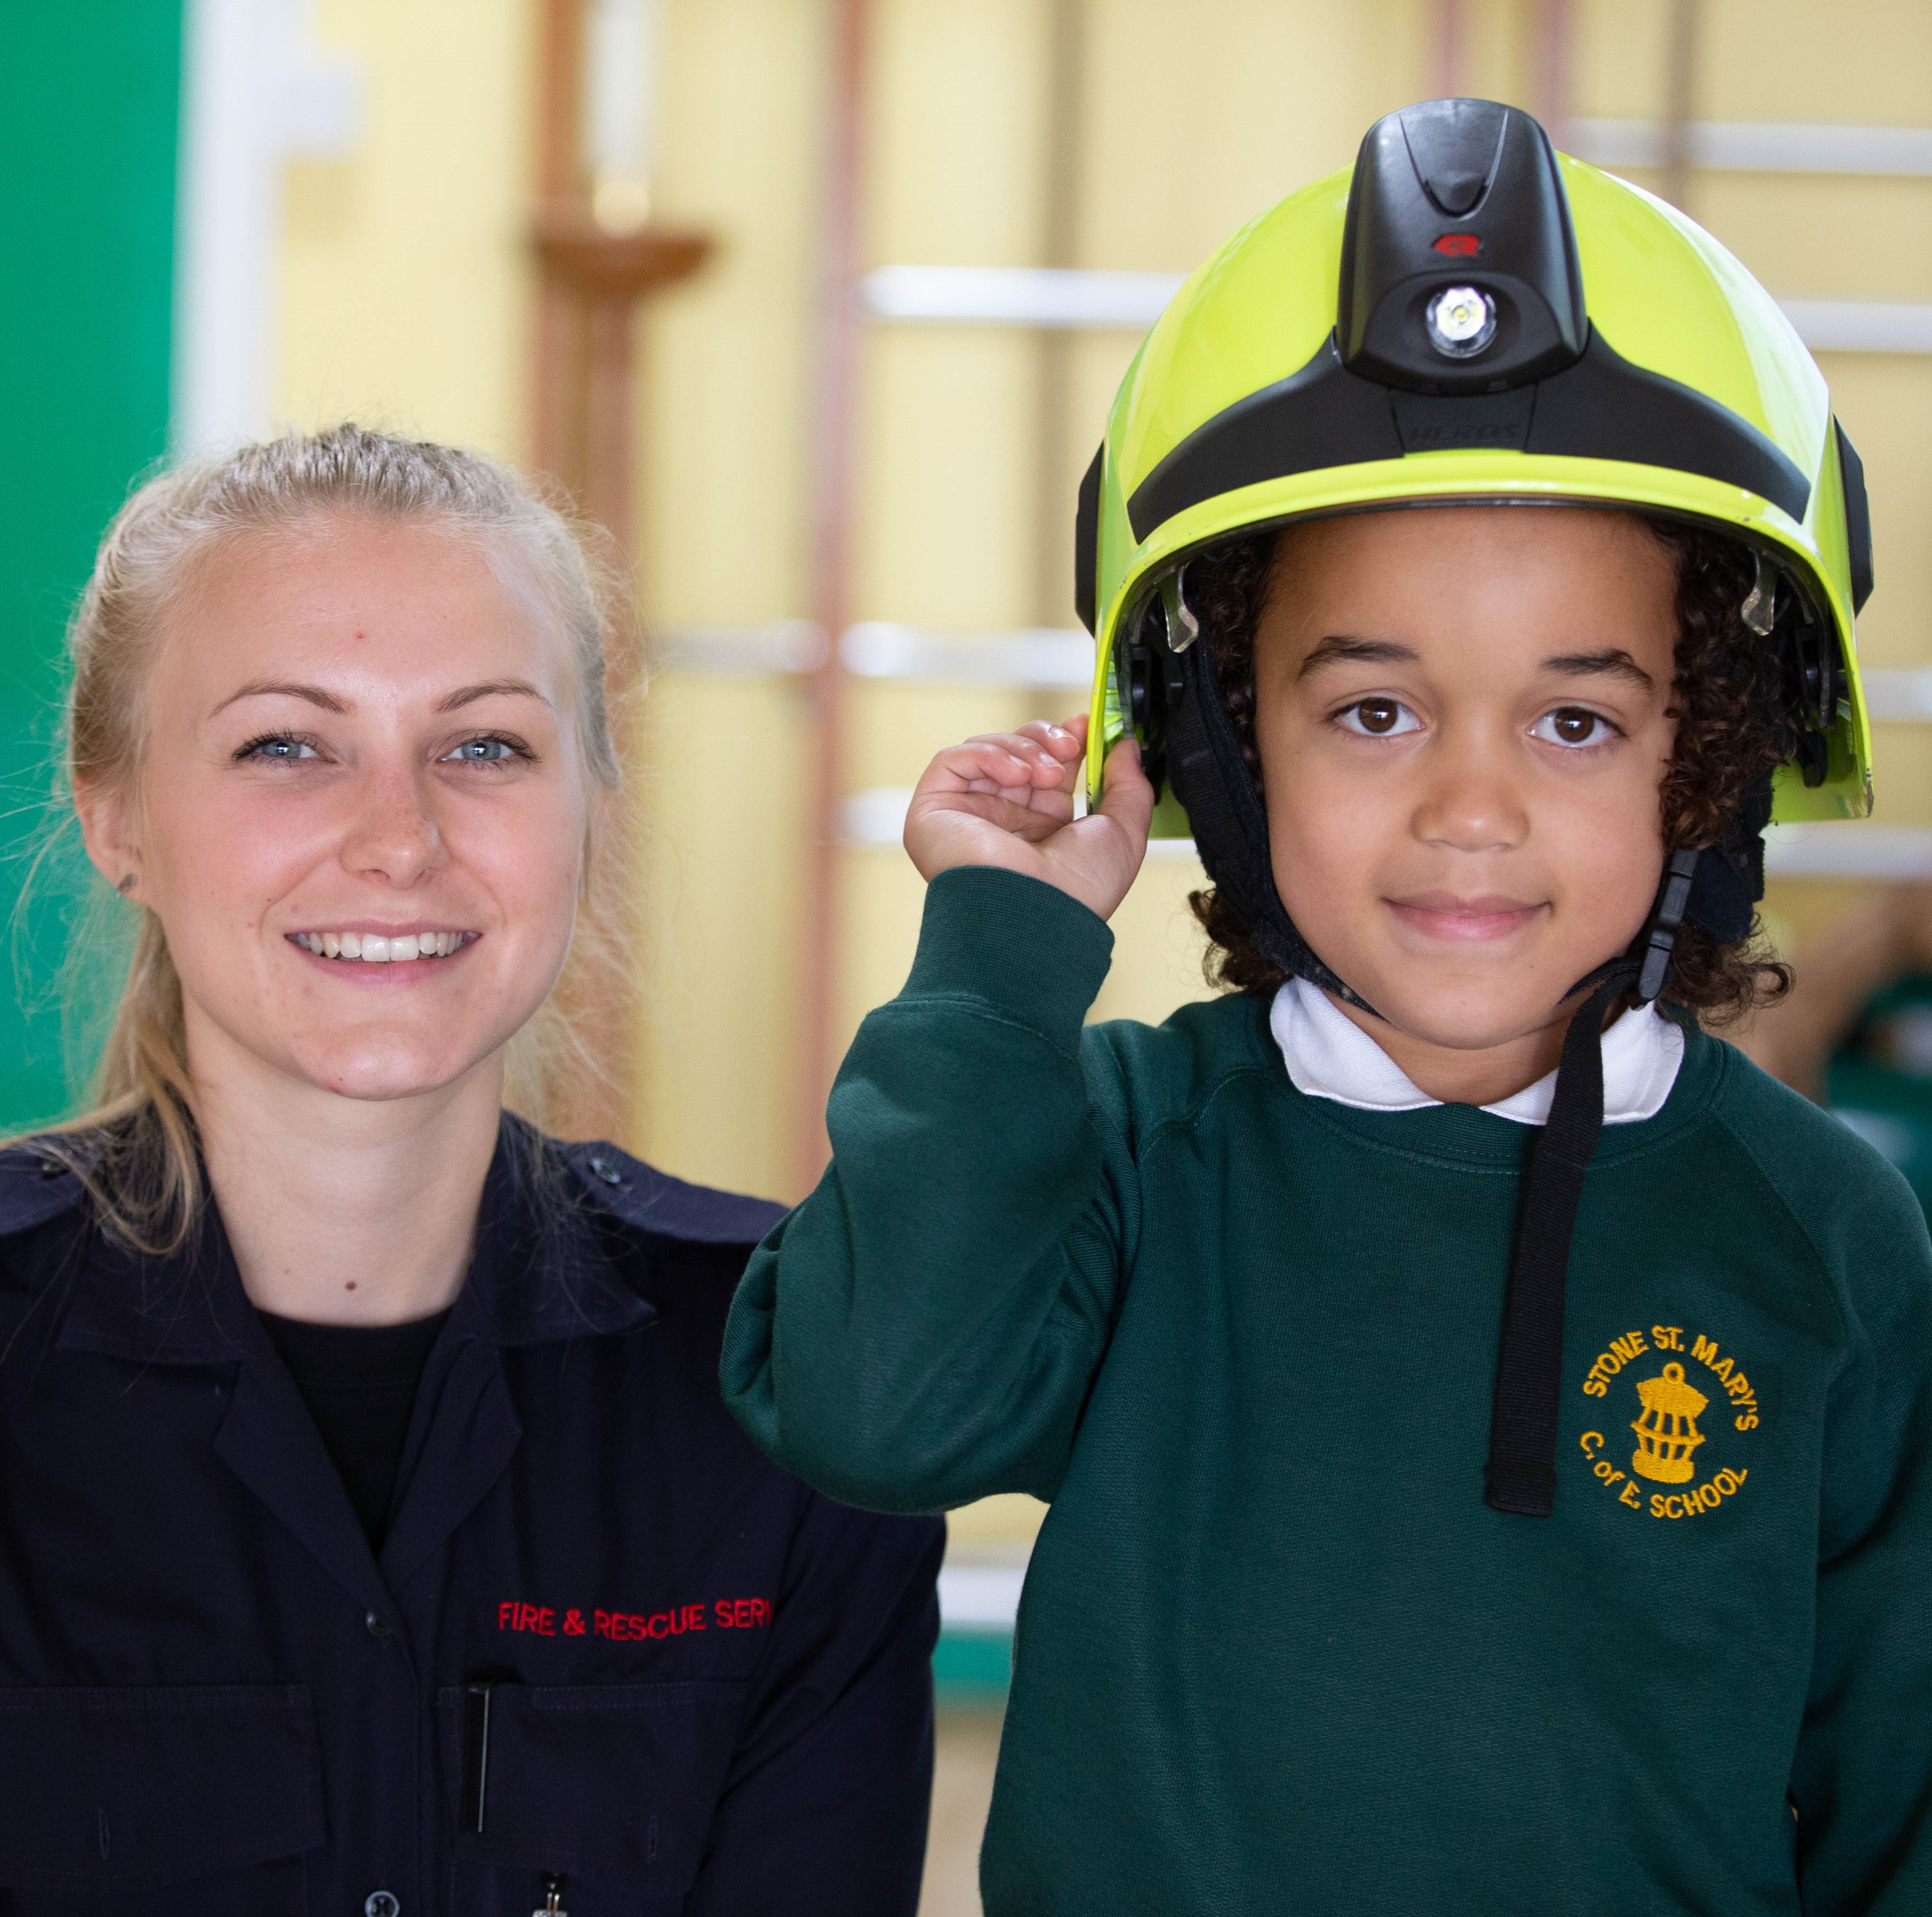 Firefighter posing with school kid